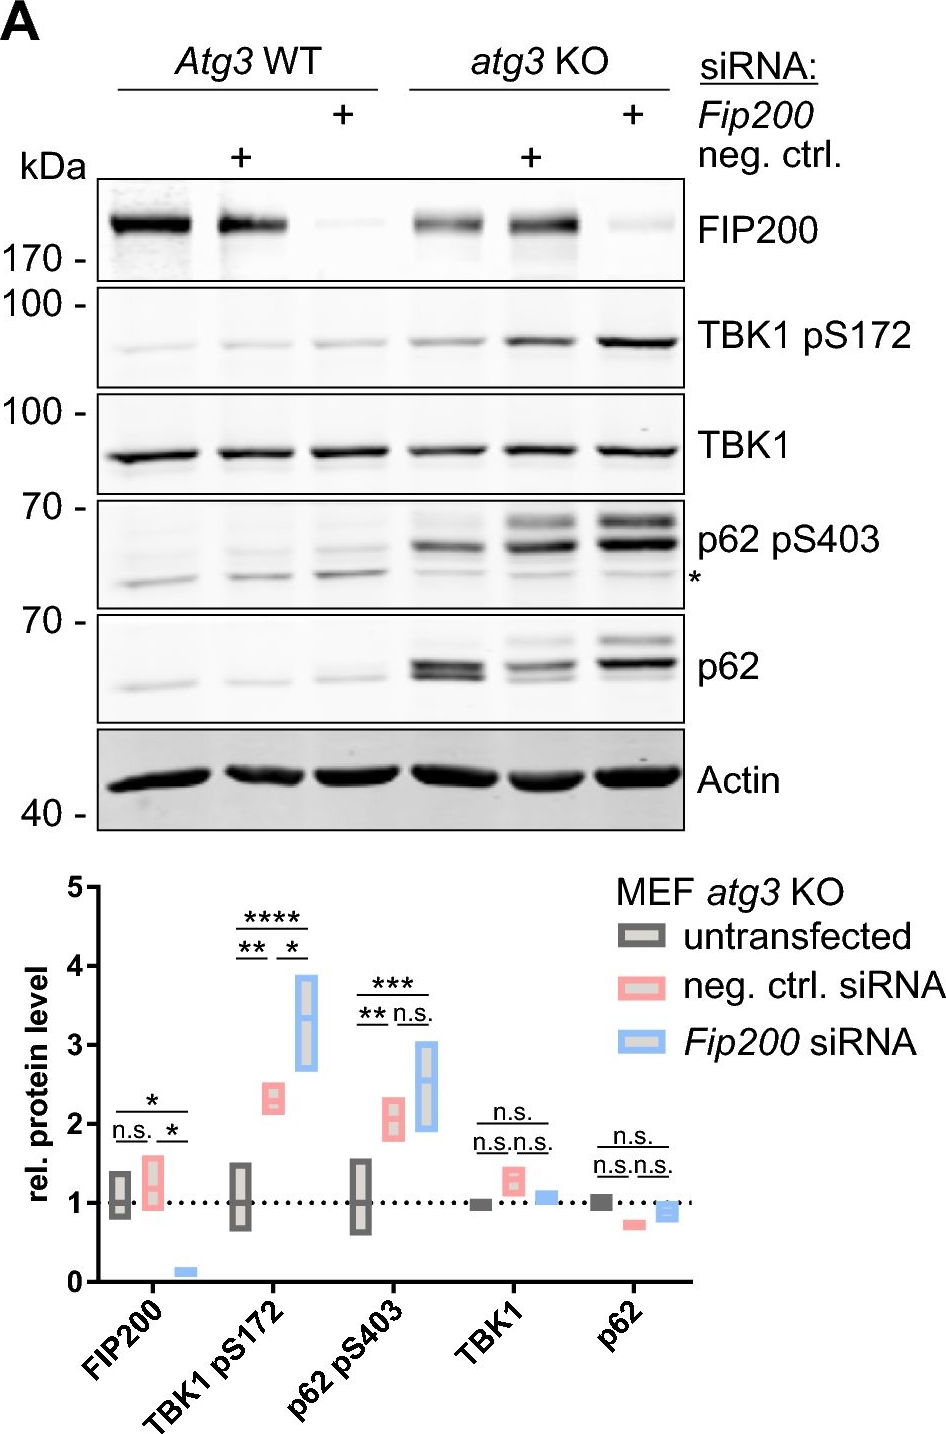 FIP200 controls the TBK1 activation threshold at SQSTM1/p62-positive condensates.